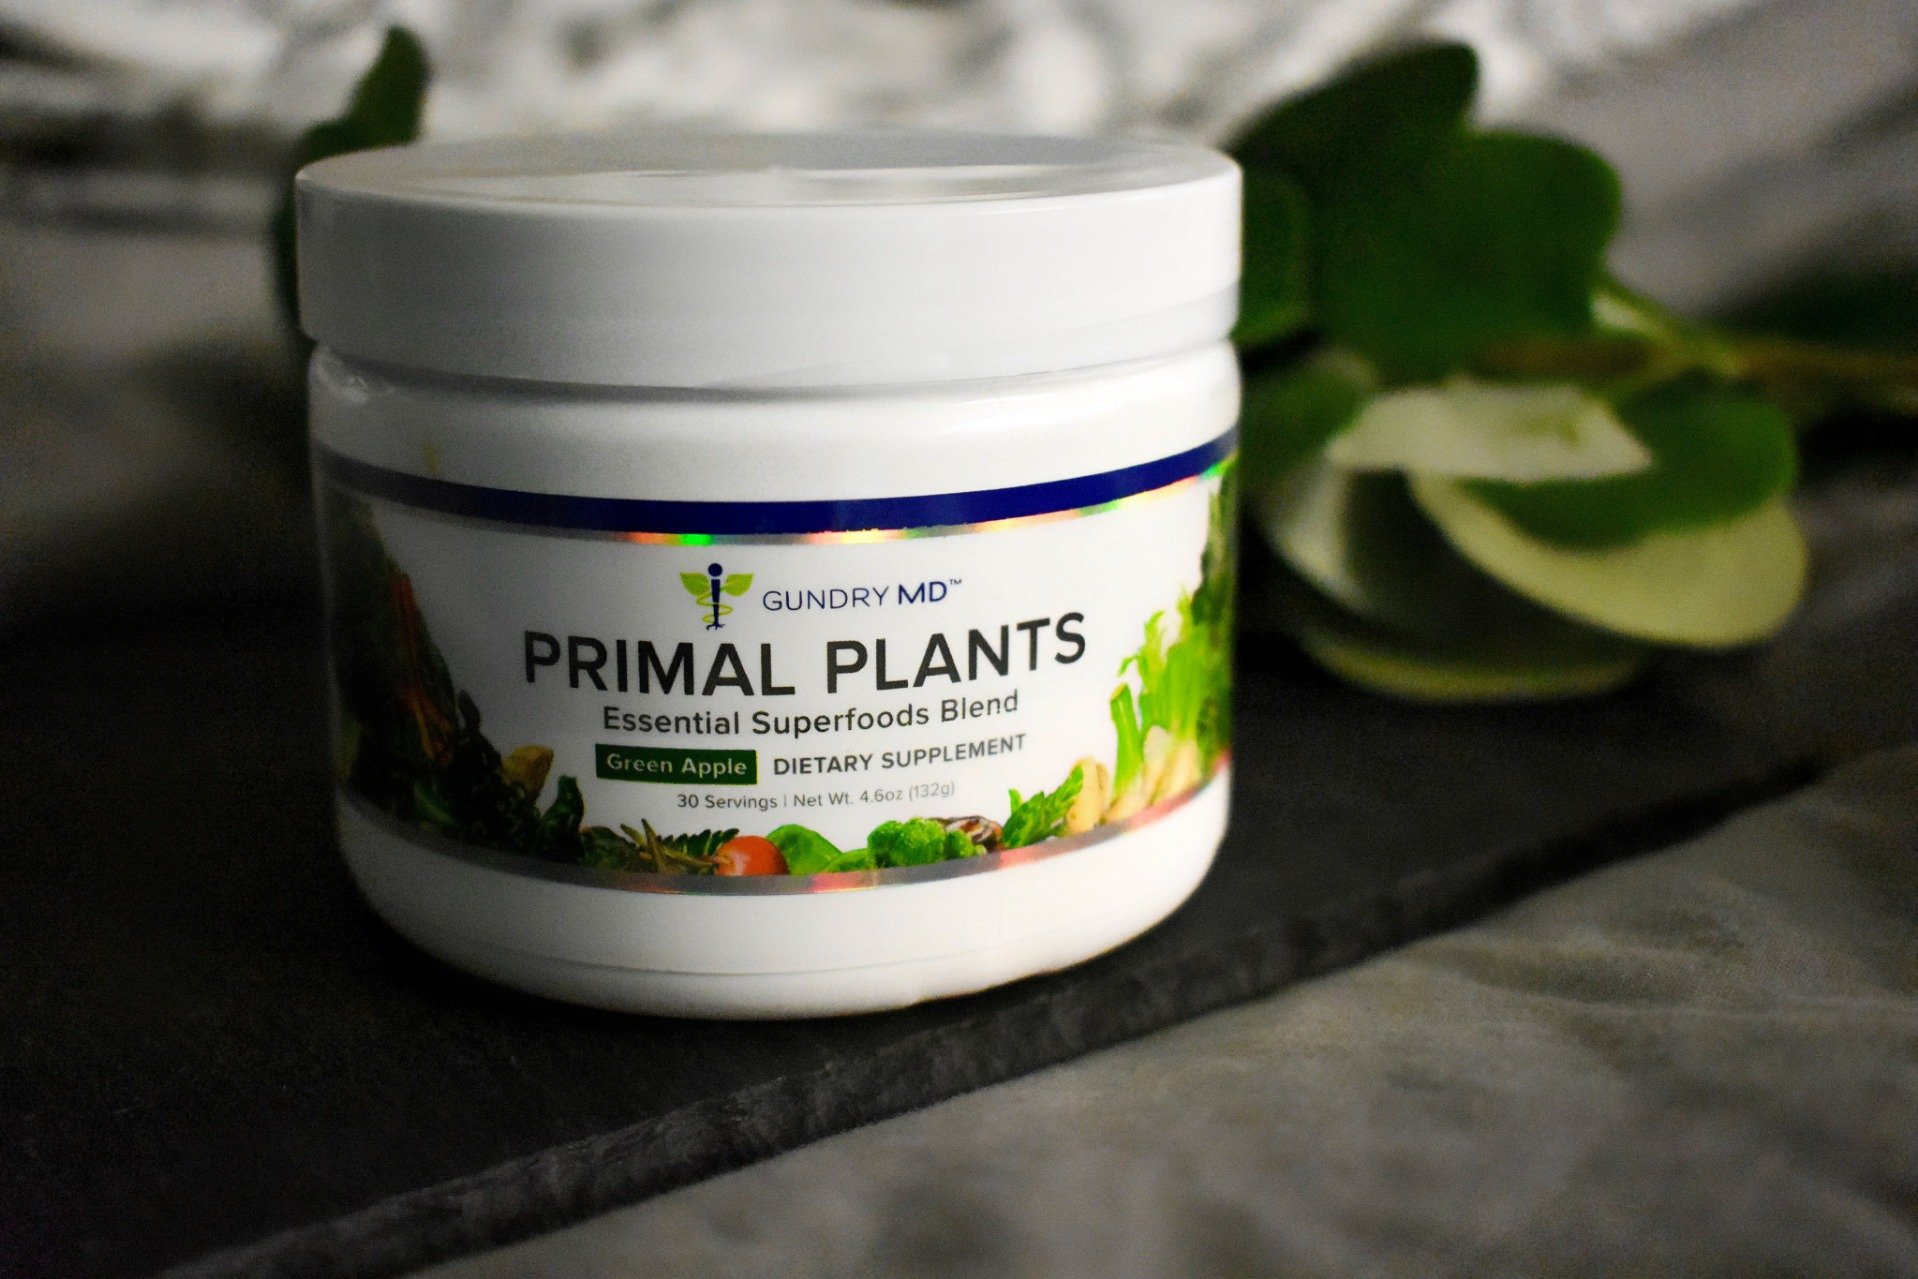 Primal Plants has 25 superfood ingredients to supplement the scant variety of micro-nutrients in daily fruit & vegetable diet